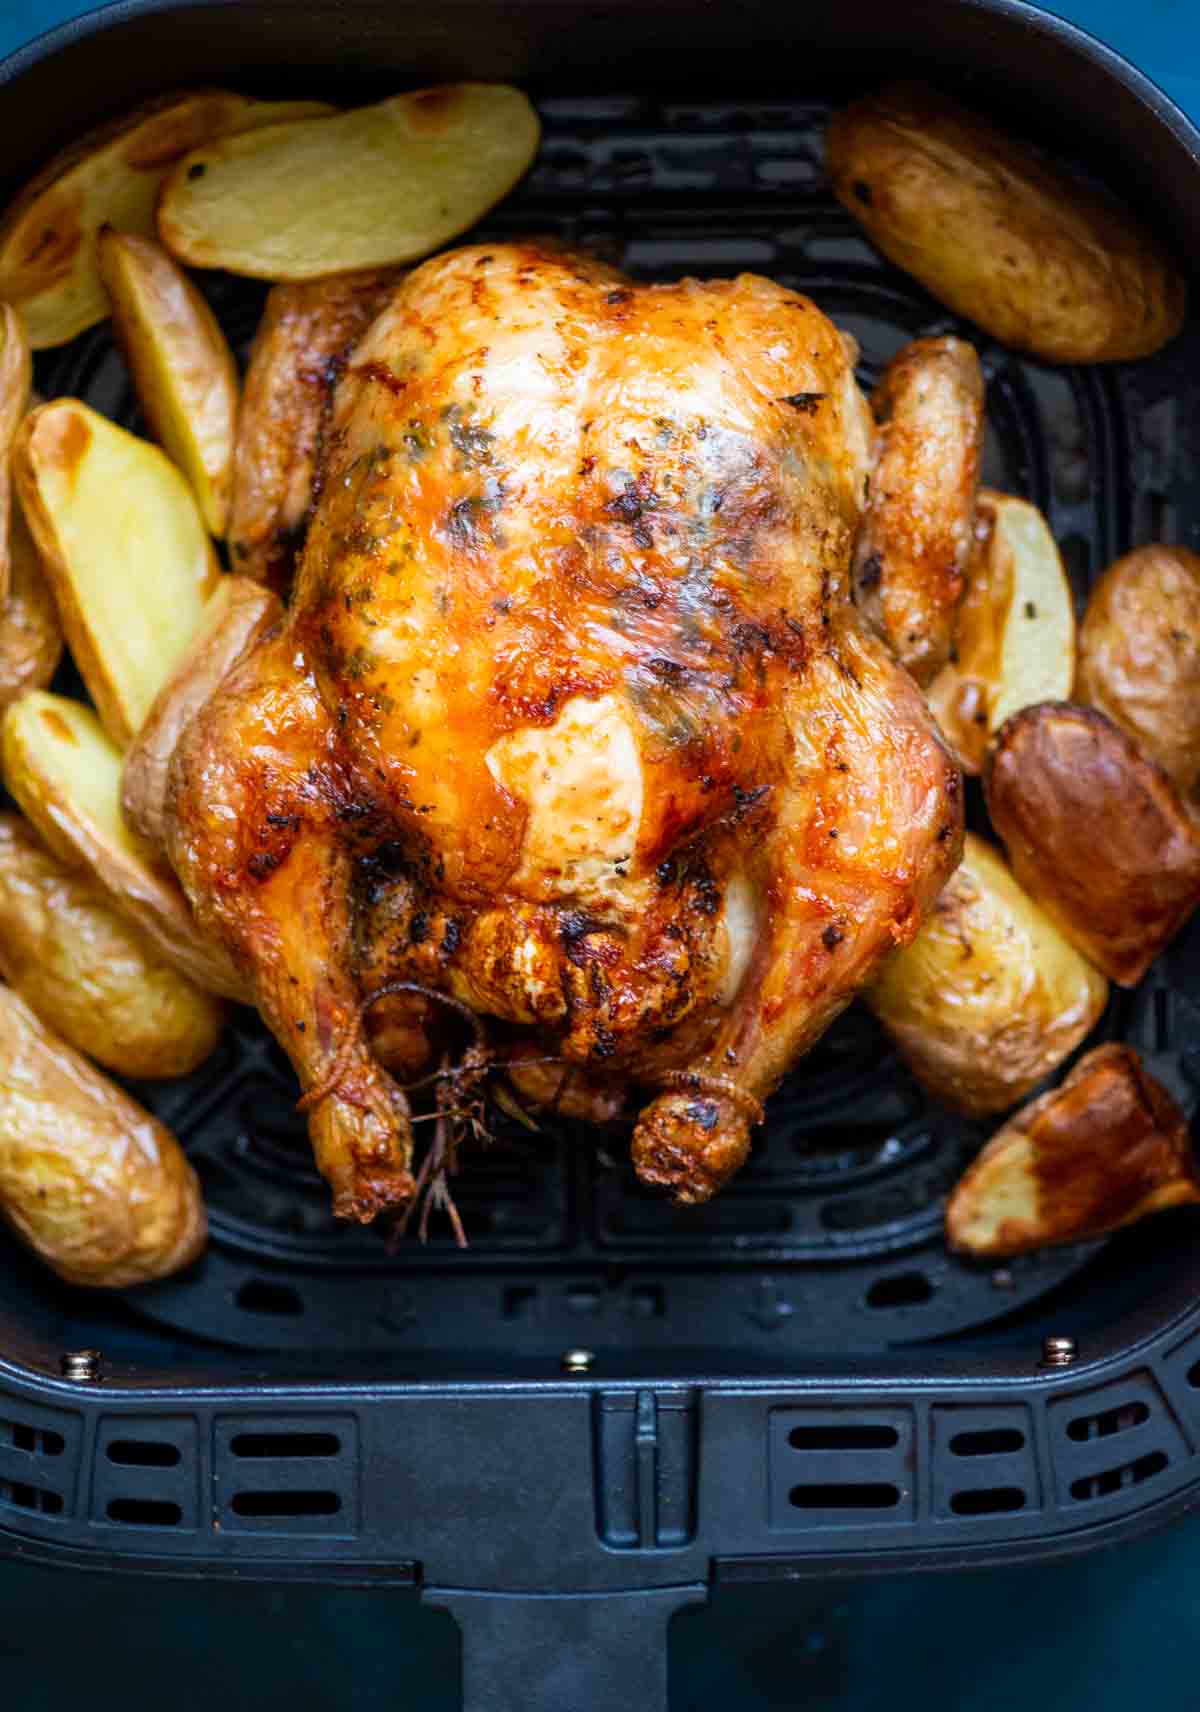 whole roasted chicken with potatoes in air fryer baslket